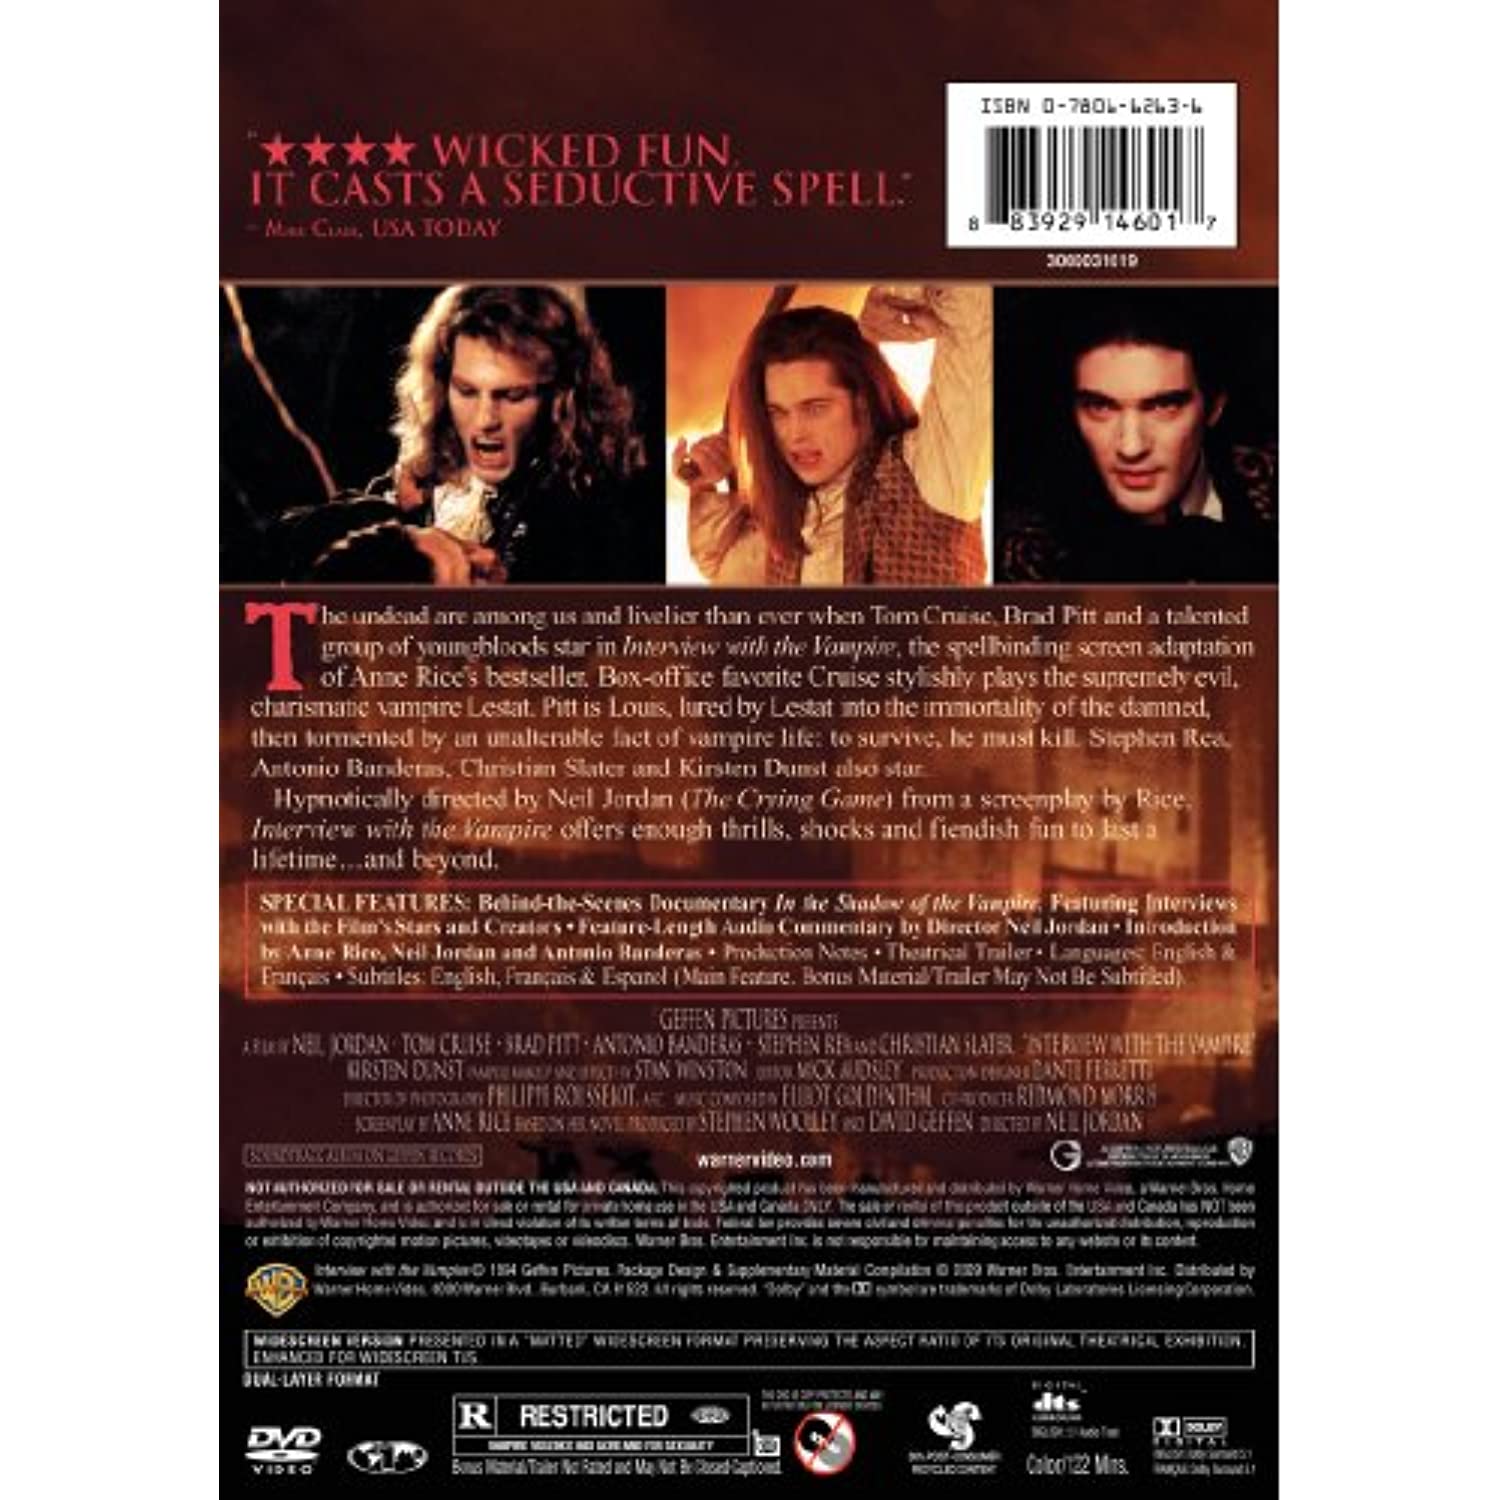 Interview With the Vampire: The Vampire Chronicles (DVD), Warner Home Video, Horror - image 2 of 2